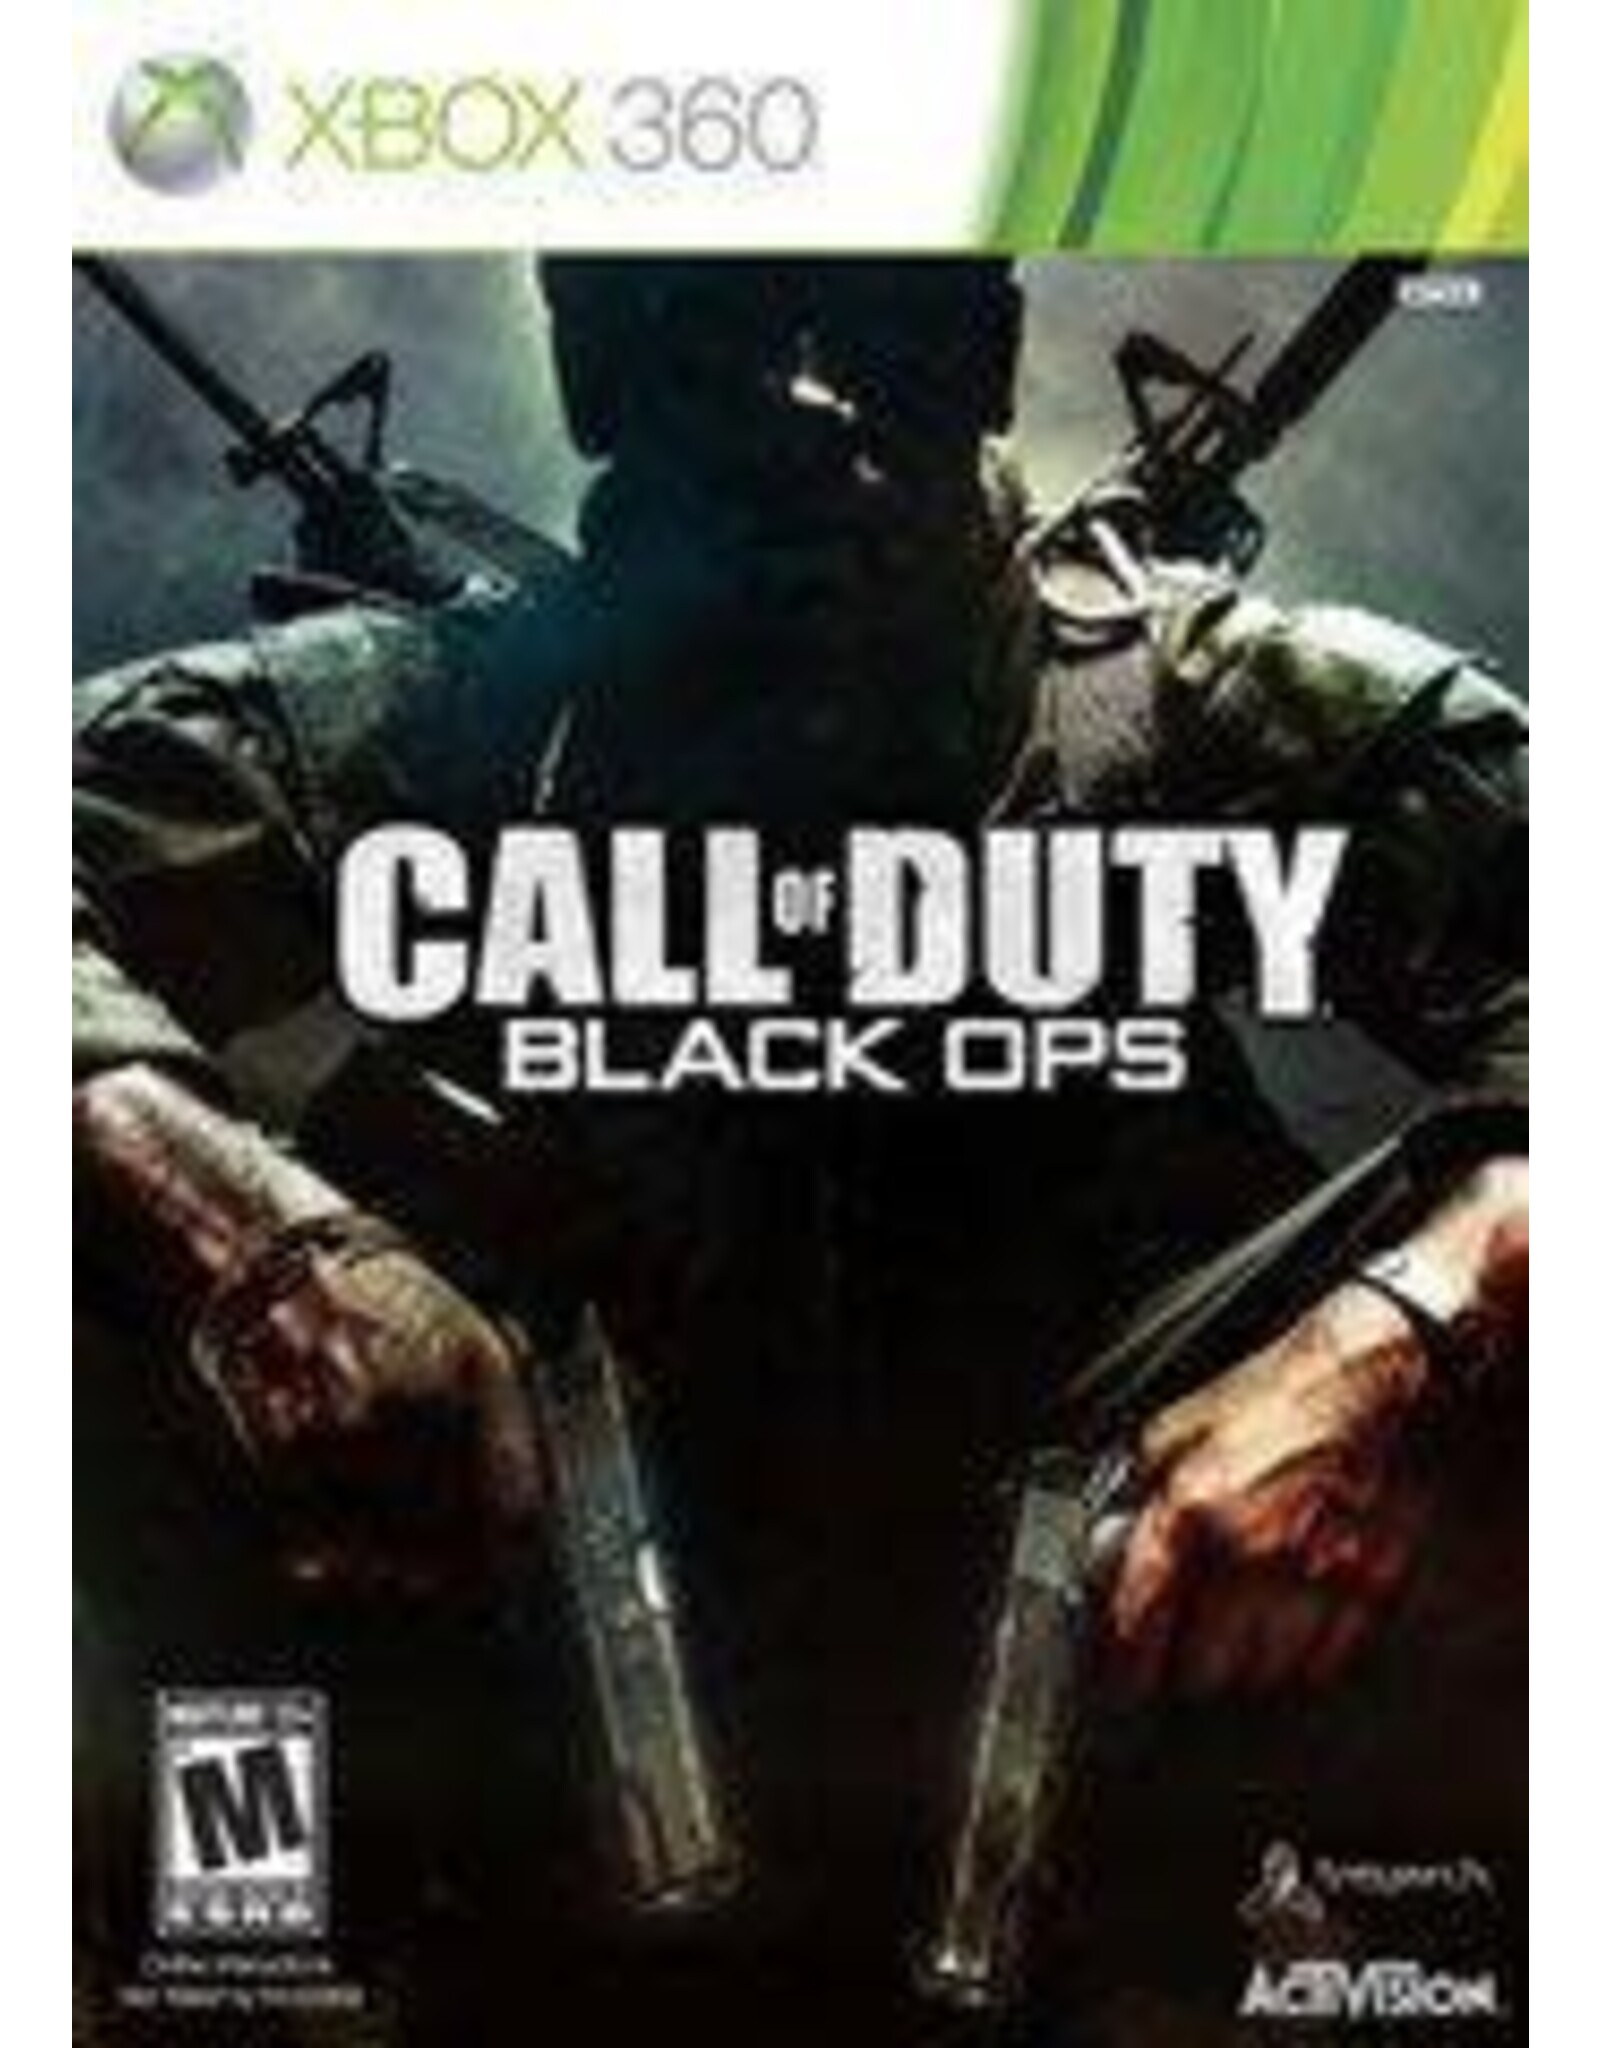 Xbox 360 Call of Duty Black Ops (Used)